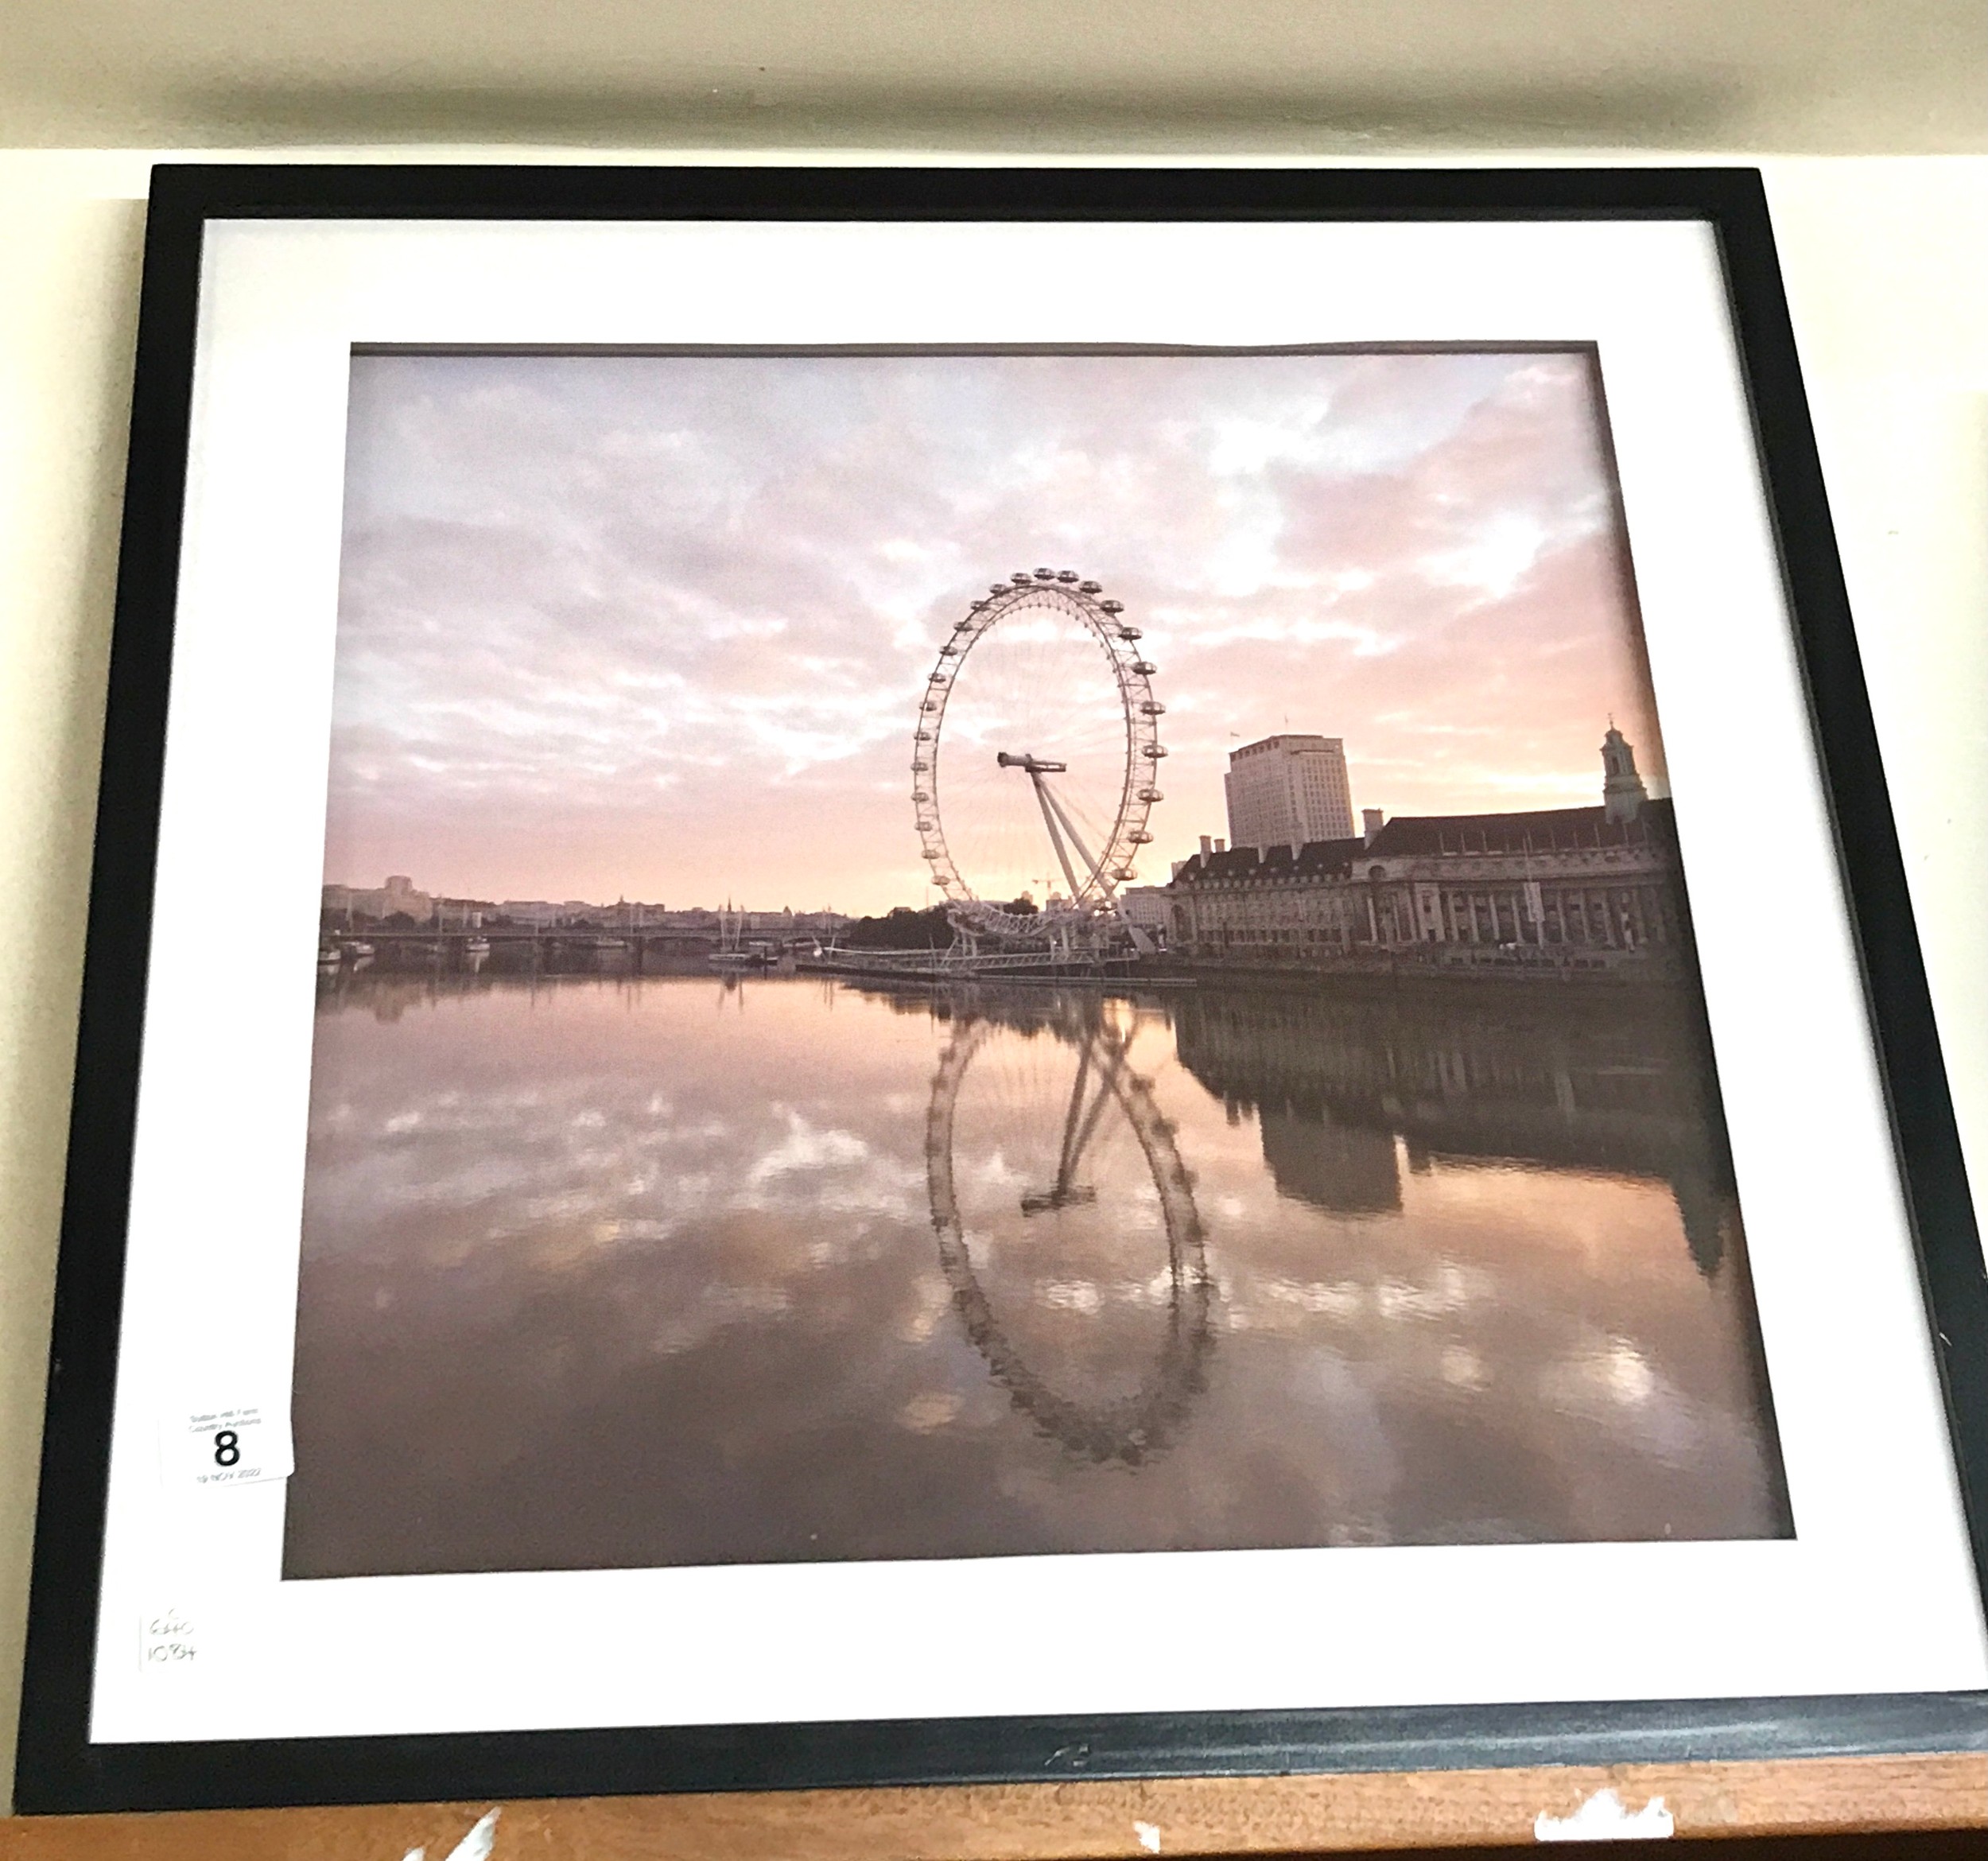 Framed London eye print measures approx 23 inches by 23.5 inches